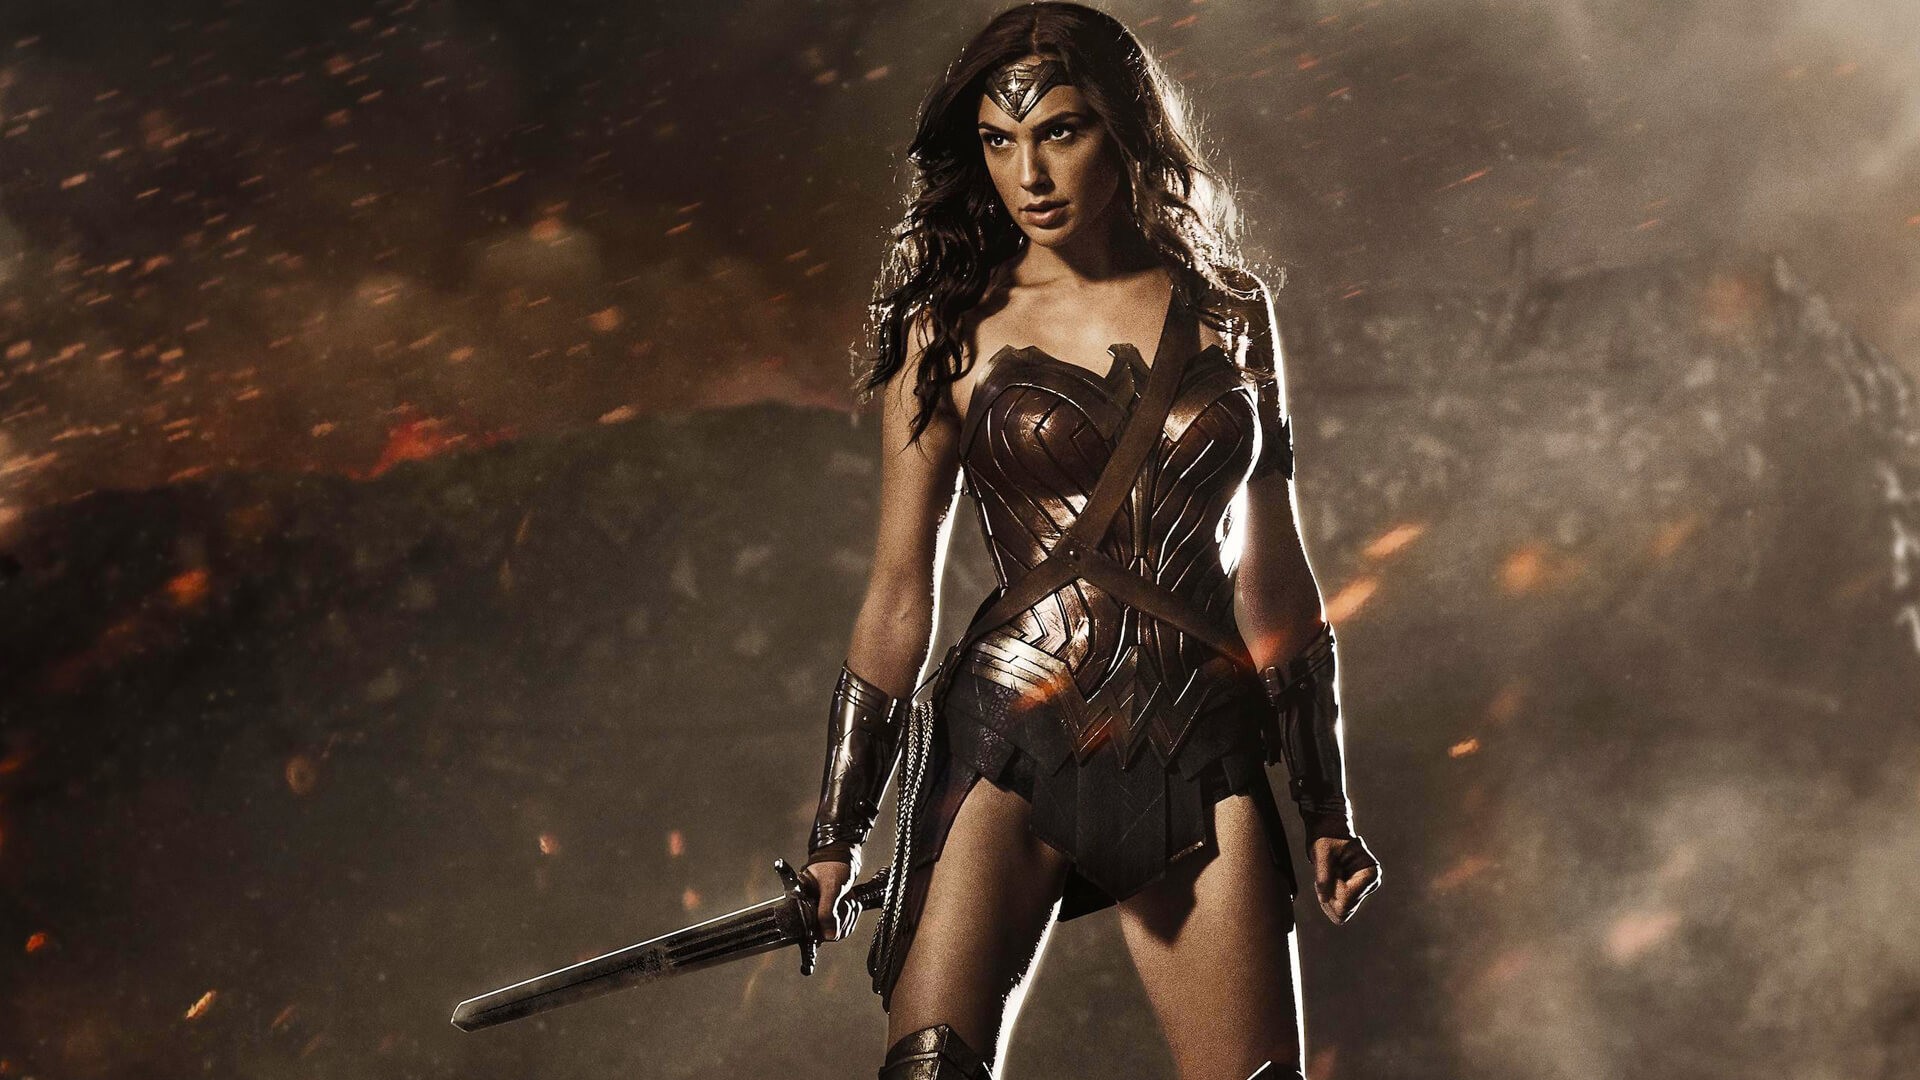 Wonder Woman Trailer Released at Comic Con